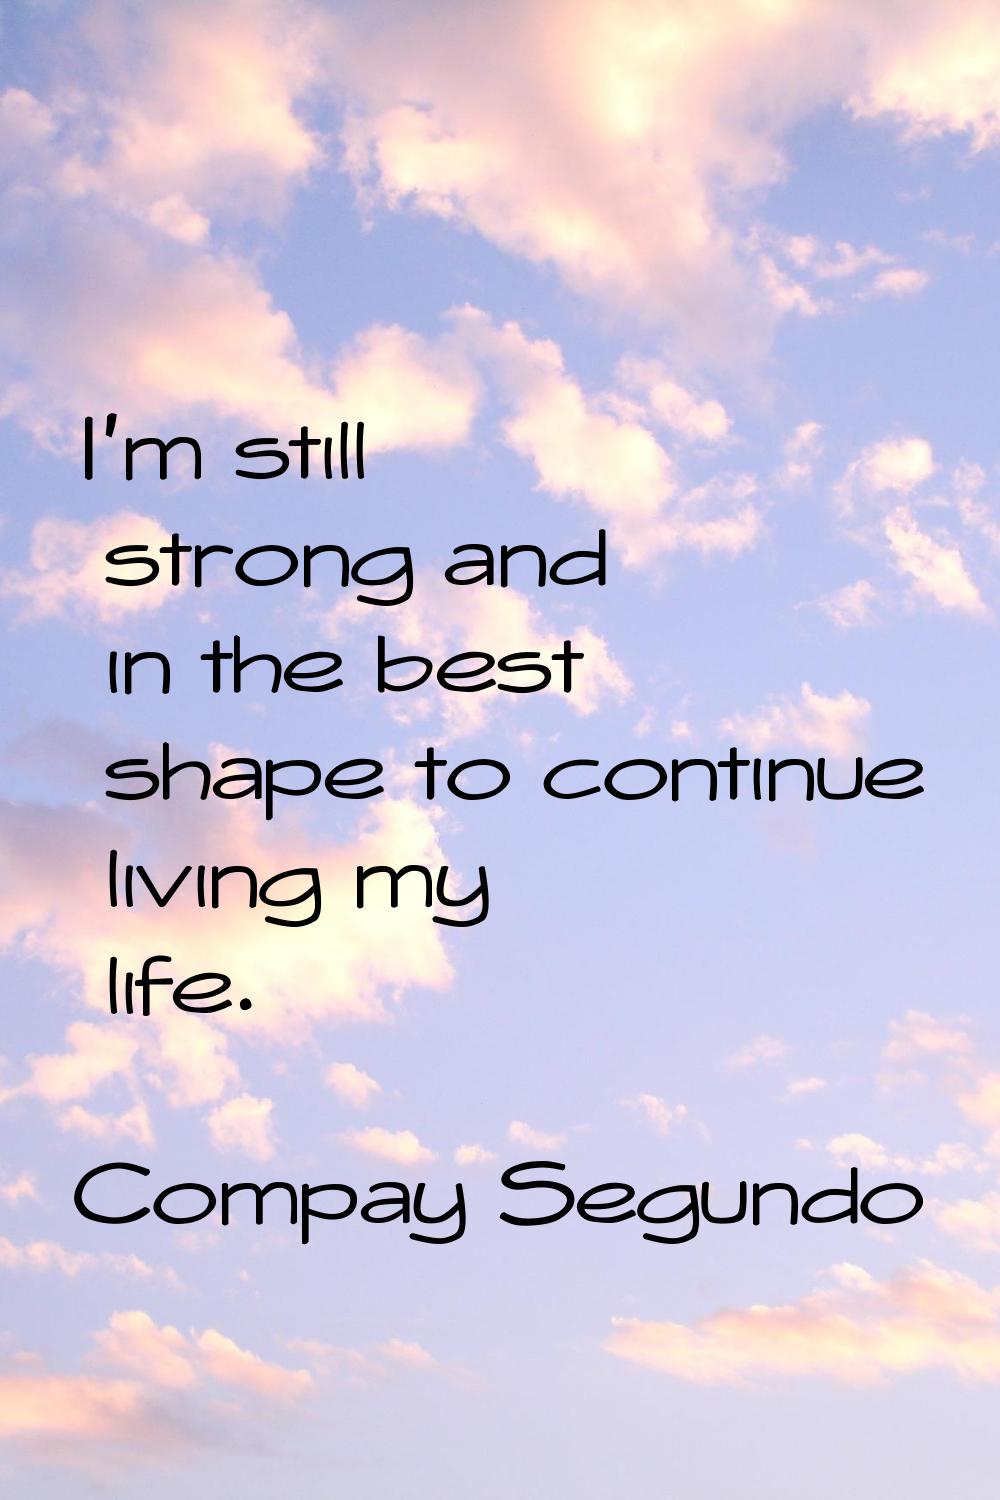 I'm still strong and in the best shape to continue living my life.